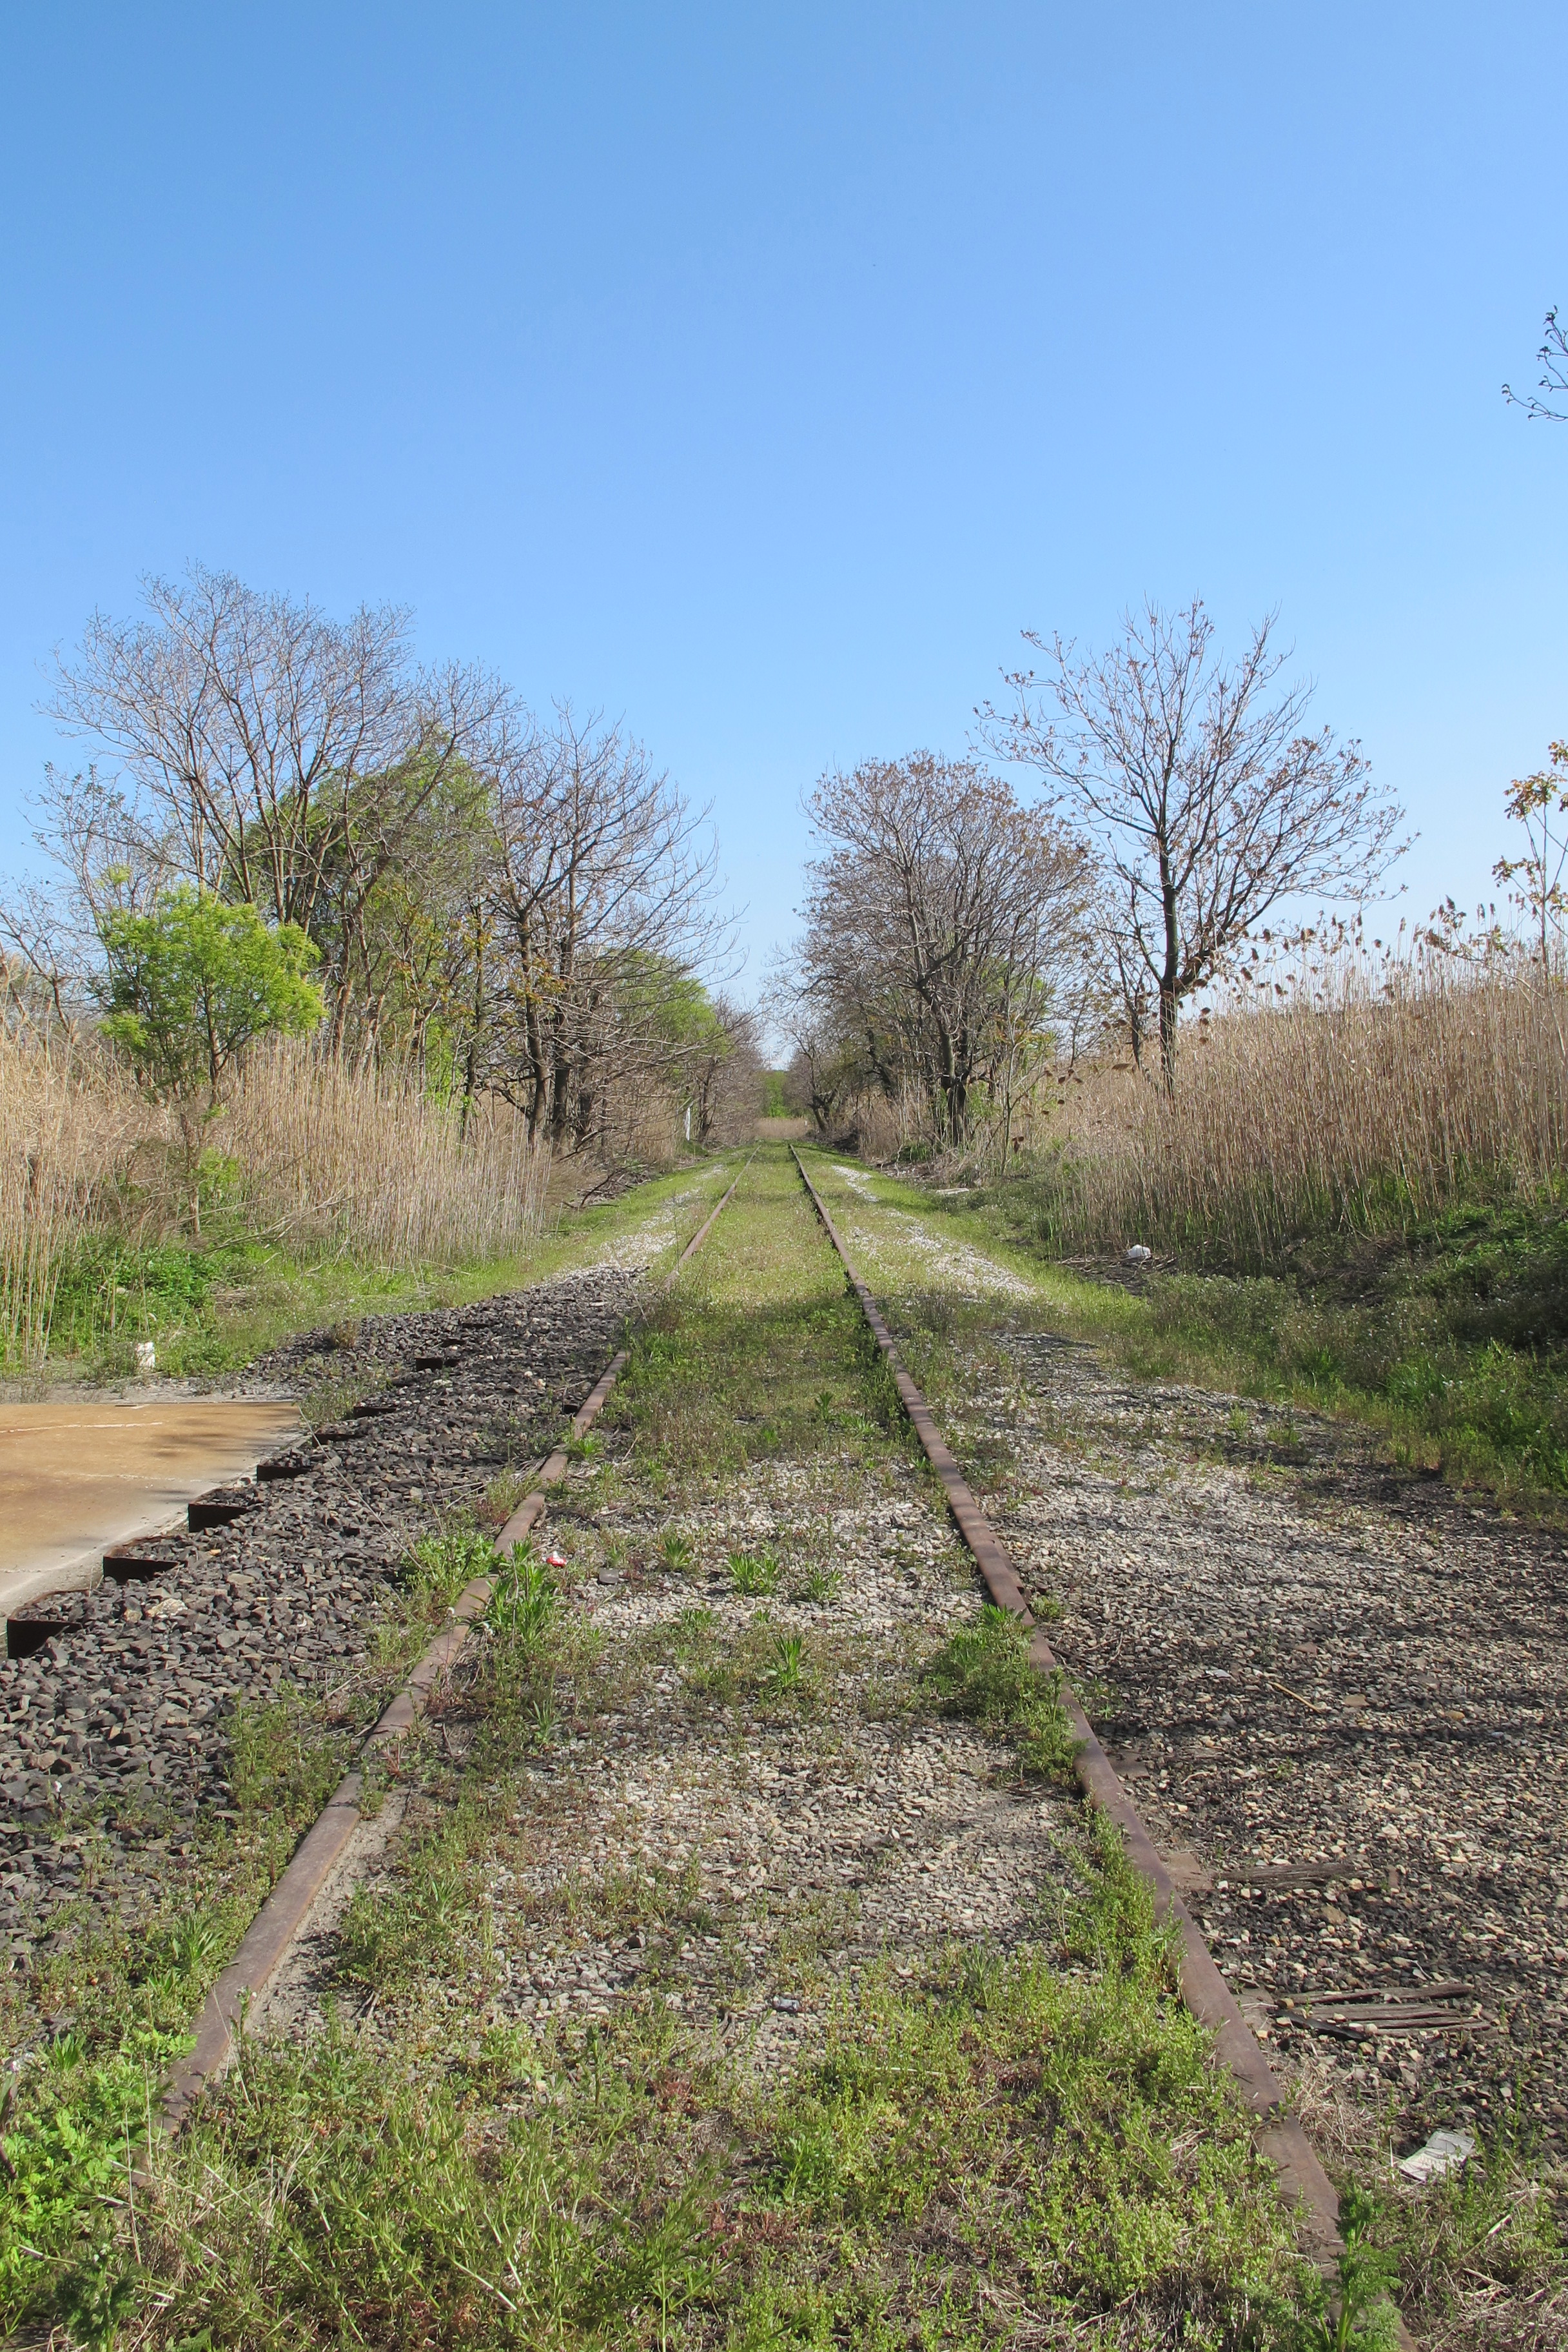 The 60th Street Rail Corridor is an abandoned right of way that could be creatively reused.